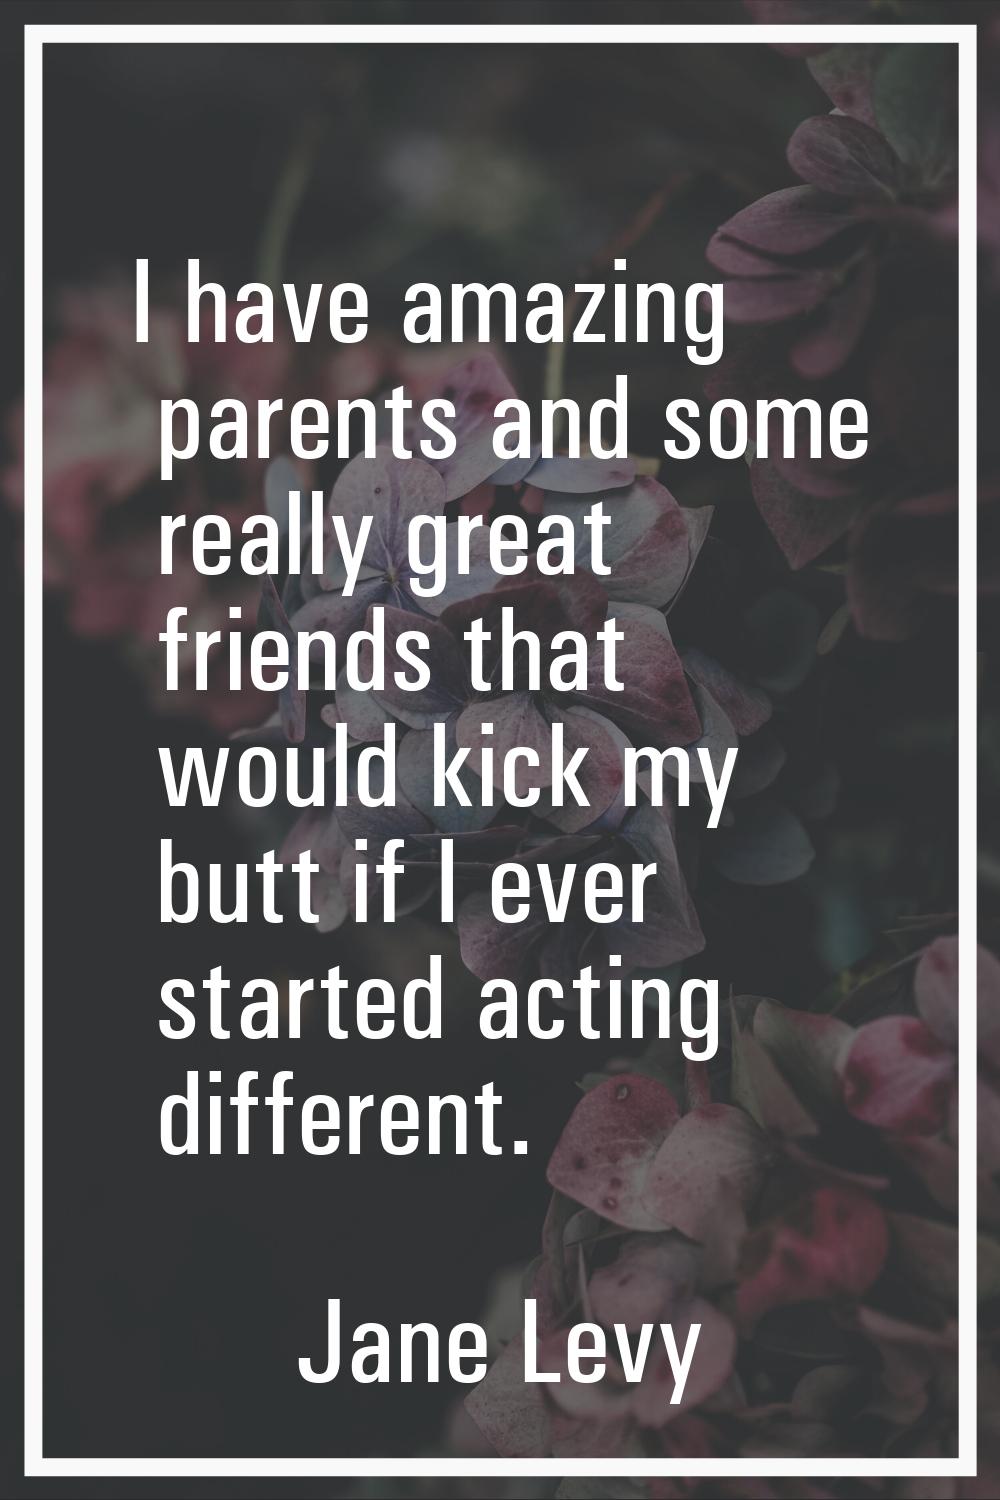 I have amazing parents and some really great friends that would kick my butt if I ever started acti